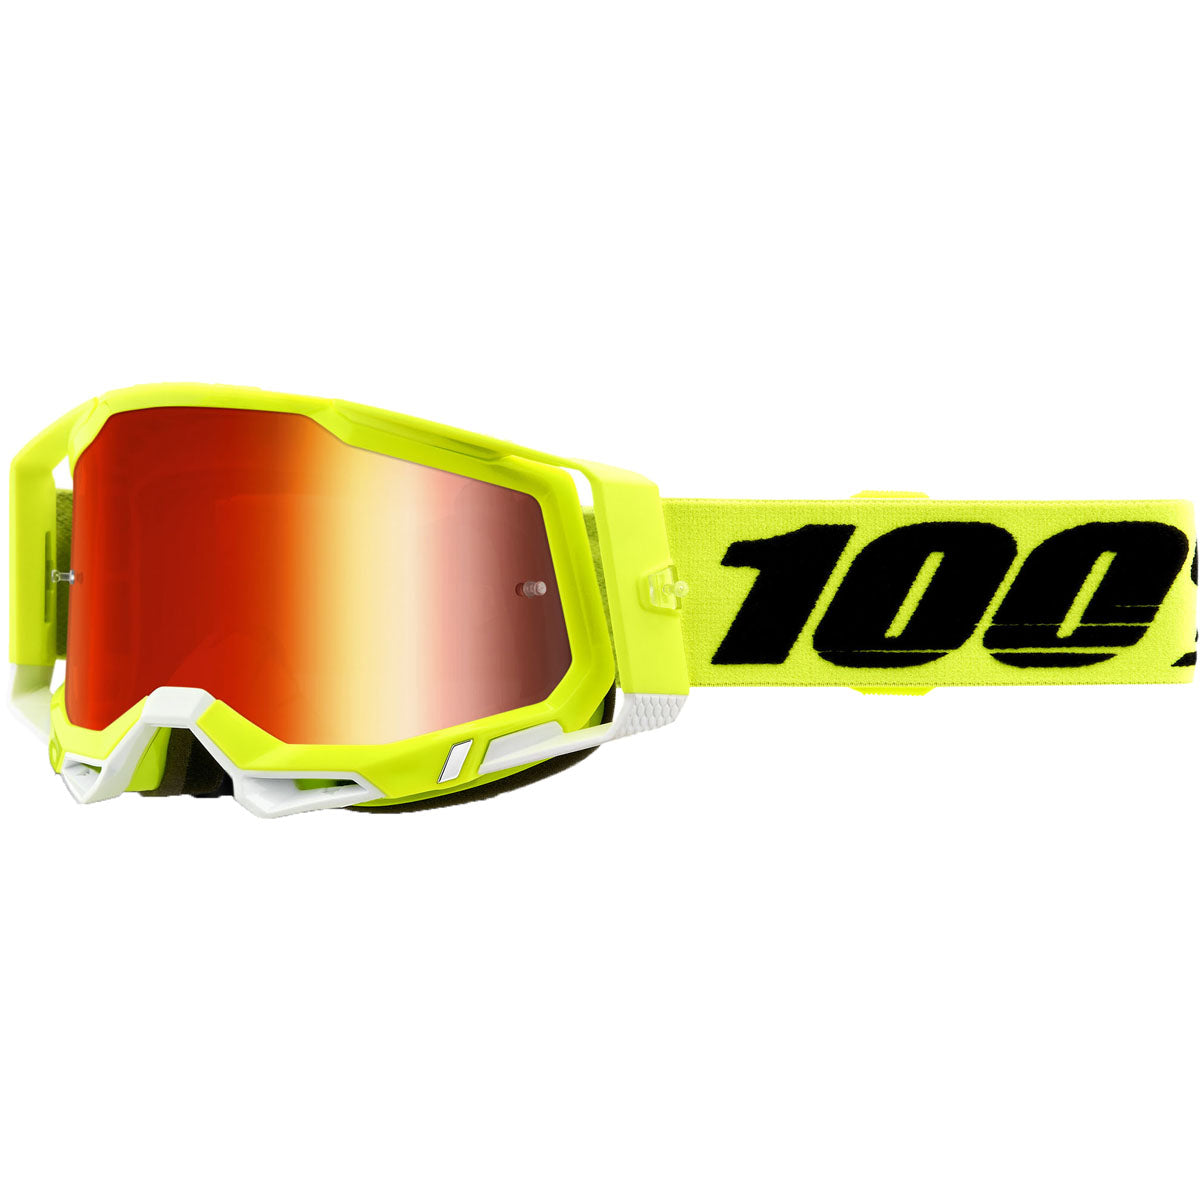 100% Racecraft 2 Goggles Yellow / Mirror Red Lens